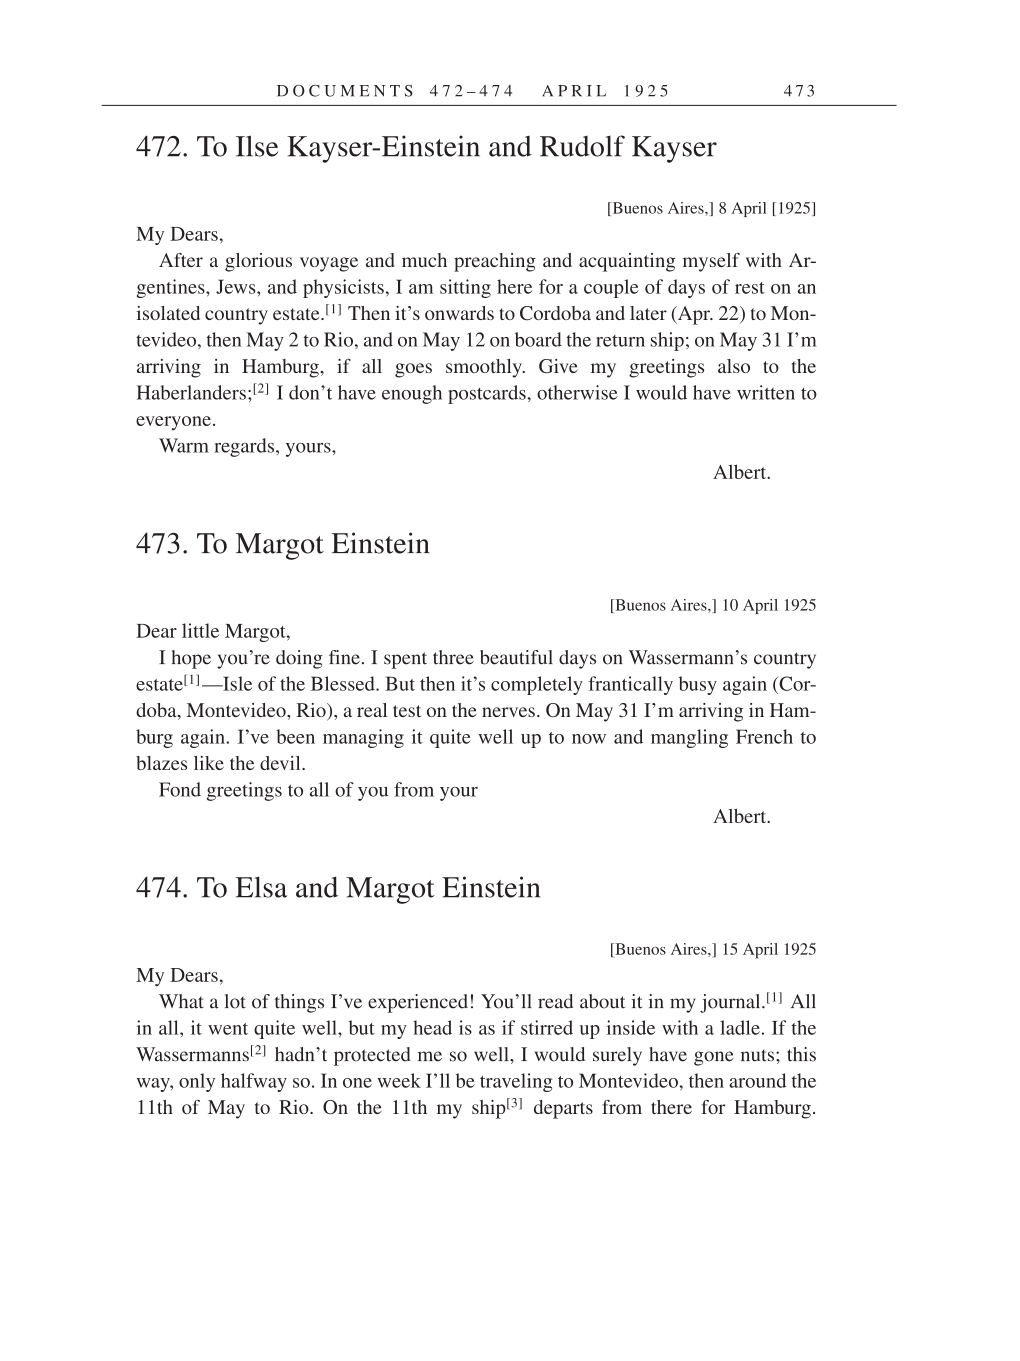 Volume 14: The Berlin Years: Writings & Correspondence, April 1923-May 1925 (English Translation Supplement) page 473